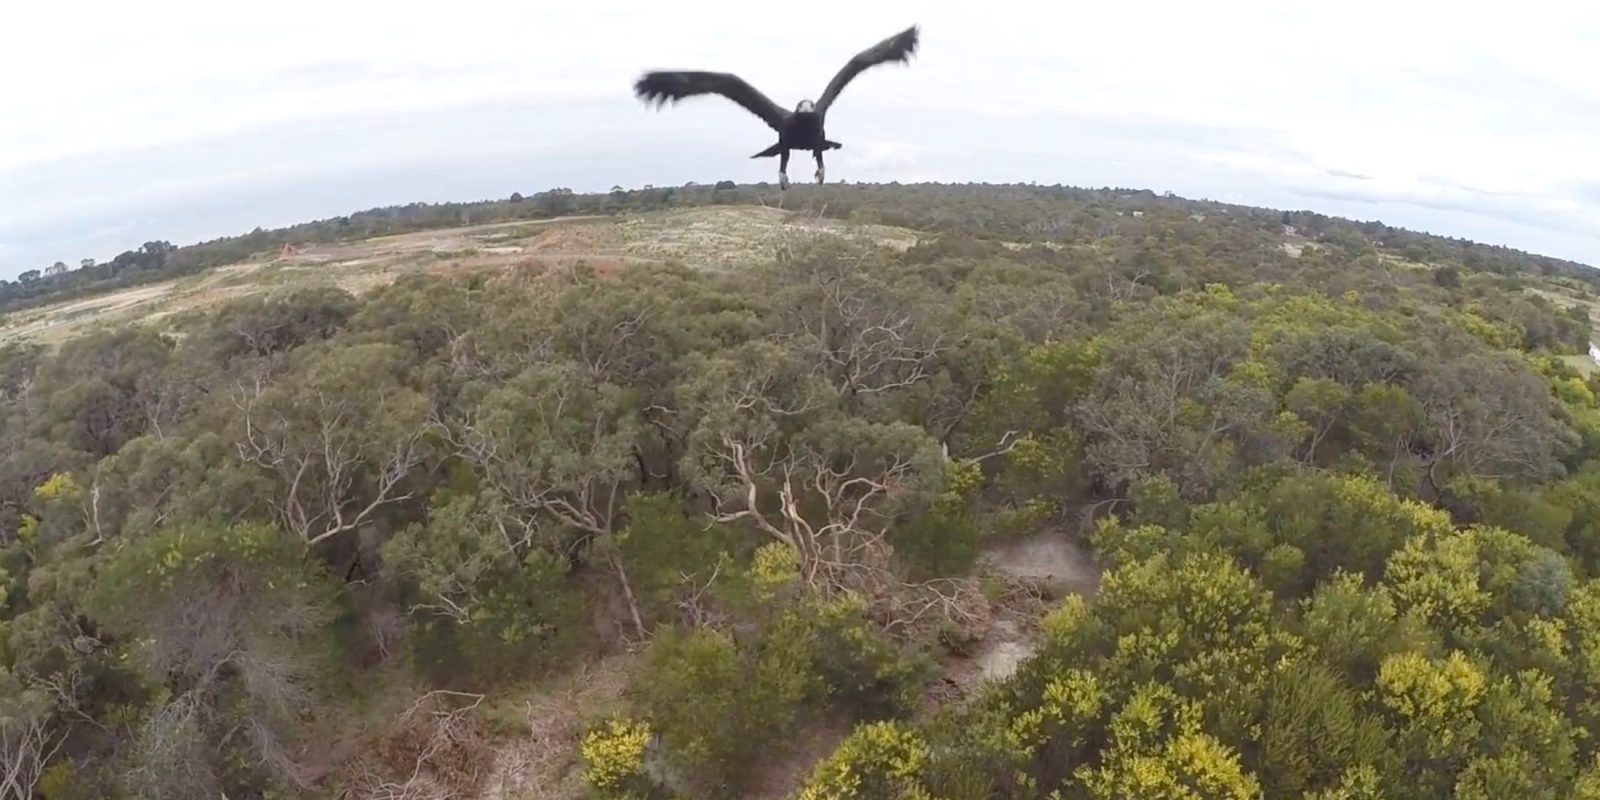 $80,000 drones ripped out of the sky by Australian wedge-tailed eagles